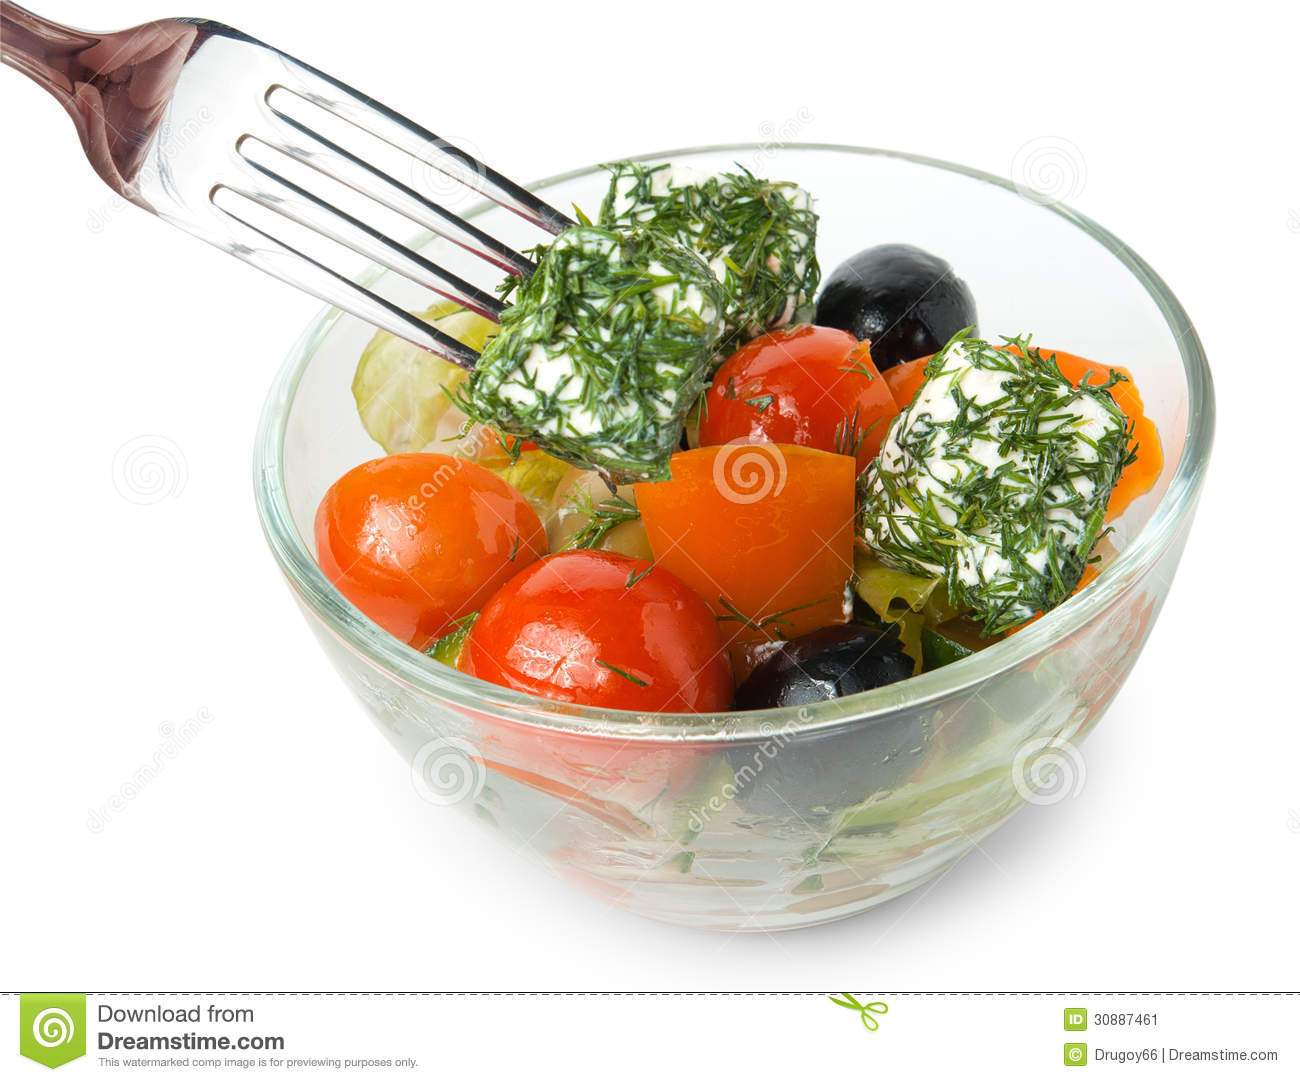 Greek Salad In Bowl And Fork Stock Image   Image  30887461